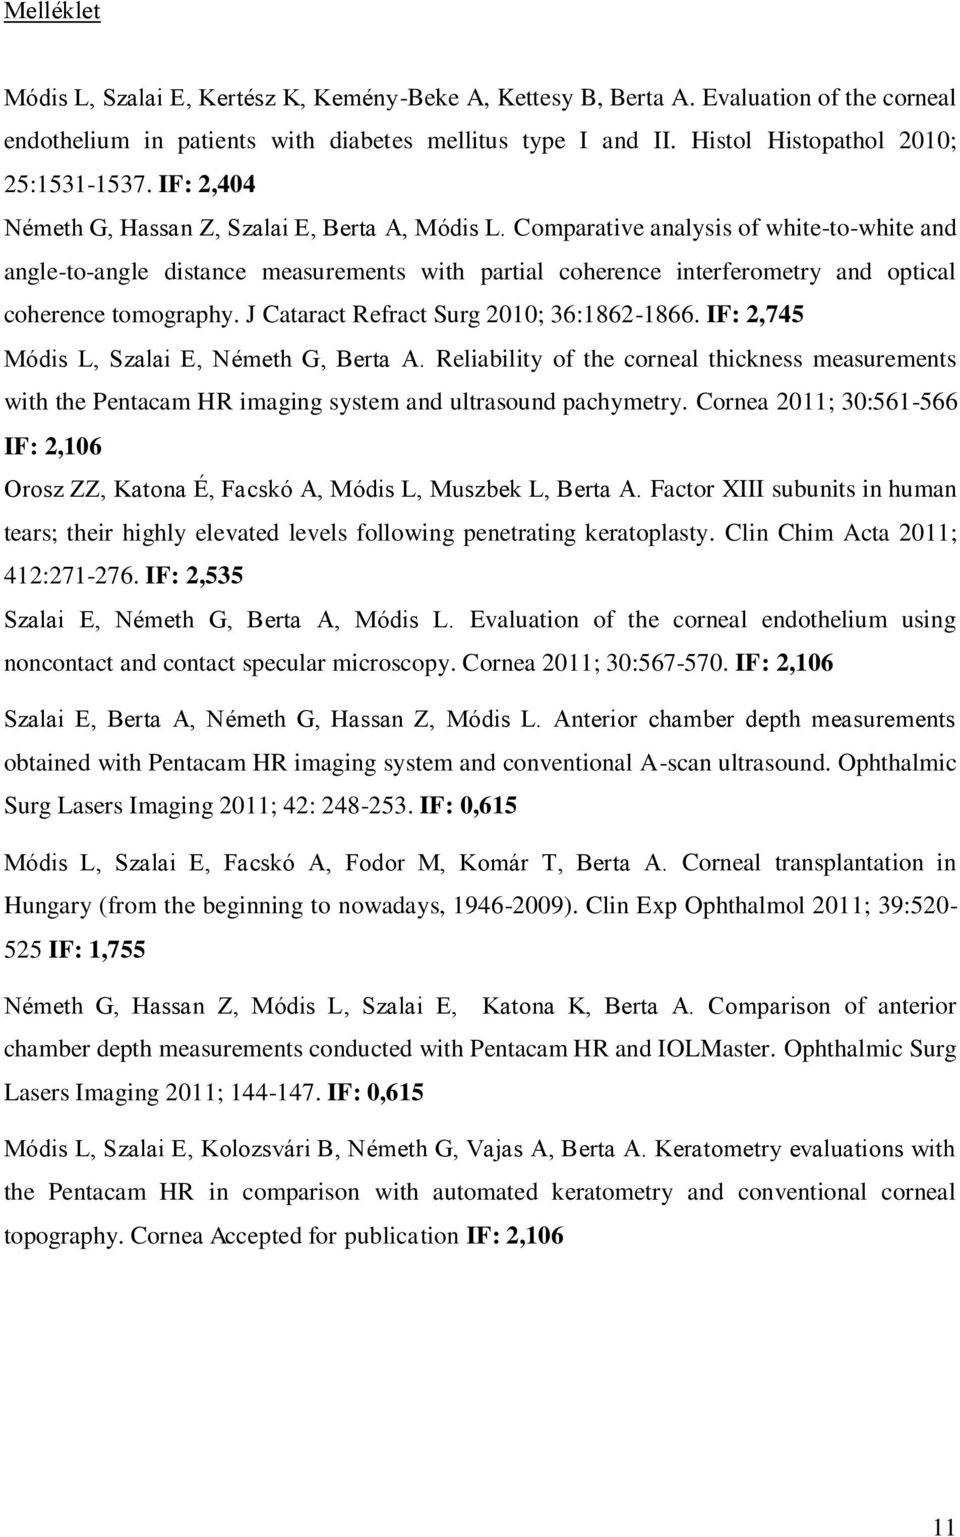 Comparative analysis of white-to-white and angle-to-angle distance measurements with partial coherence interferometry and optical coherence tomography. J Cataract Refract Surg 2010; 36:1862-1866.